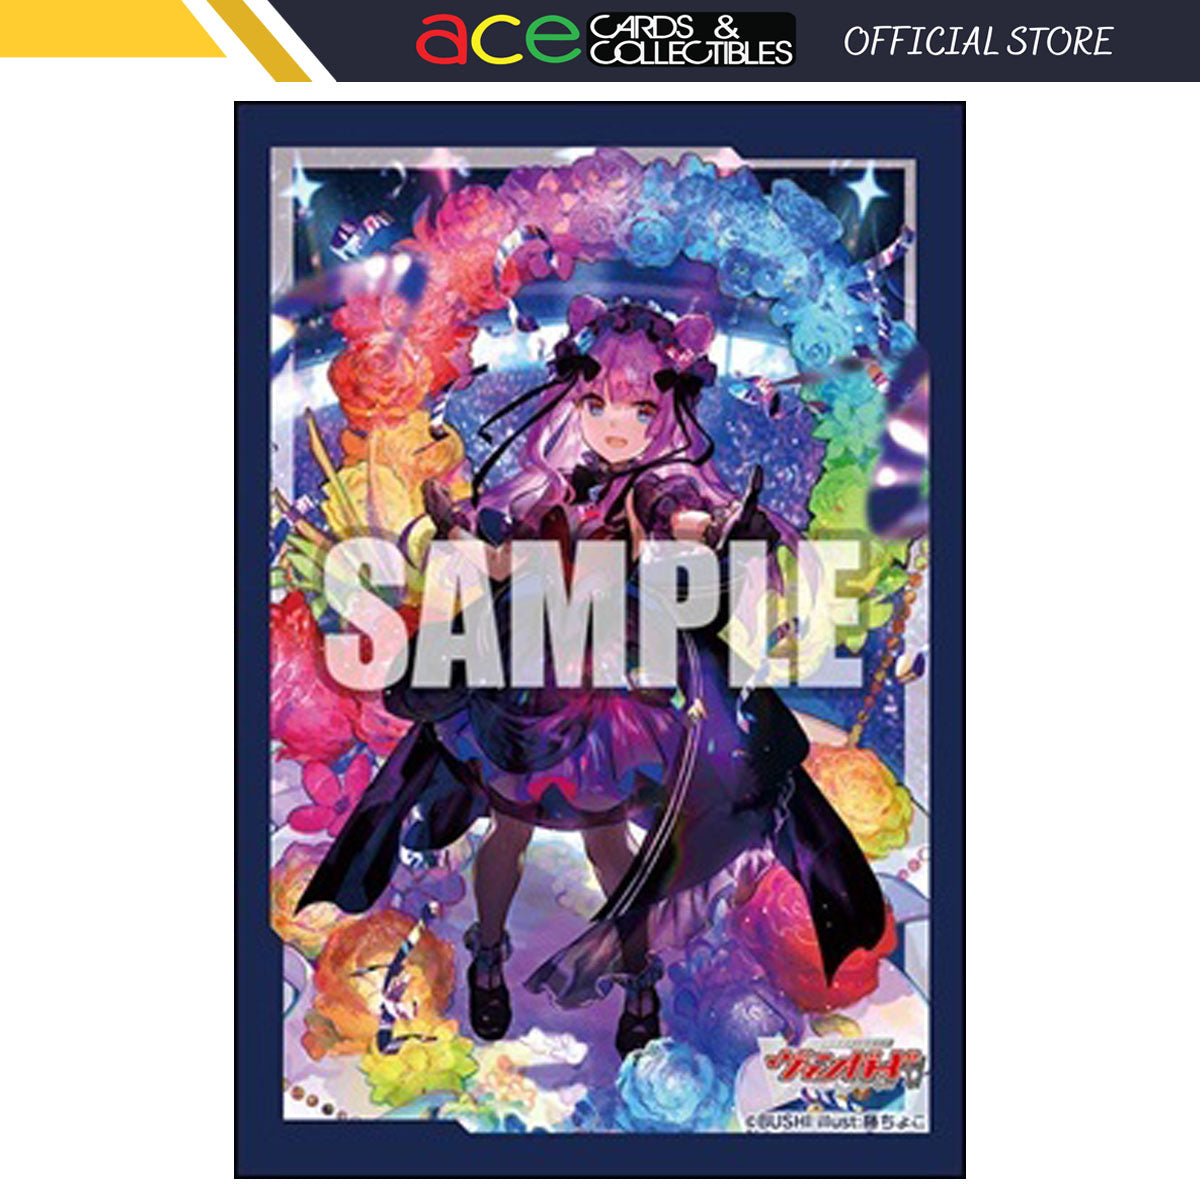 CardFight Vanguard OverDress Sleeve Collection Mini Vol. 594 "Prismagica, Wilista"-Bushiroad-Ace Cards & Collectibles